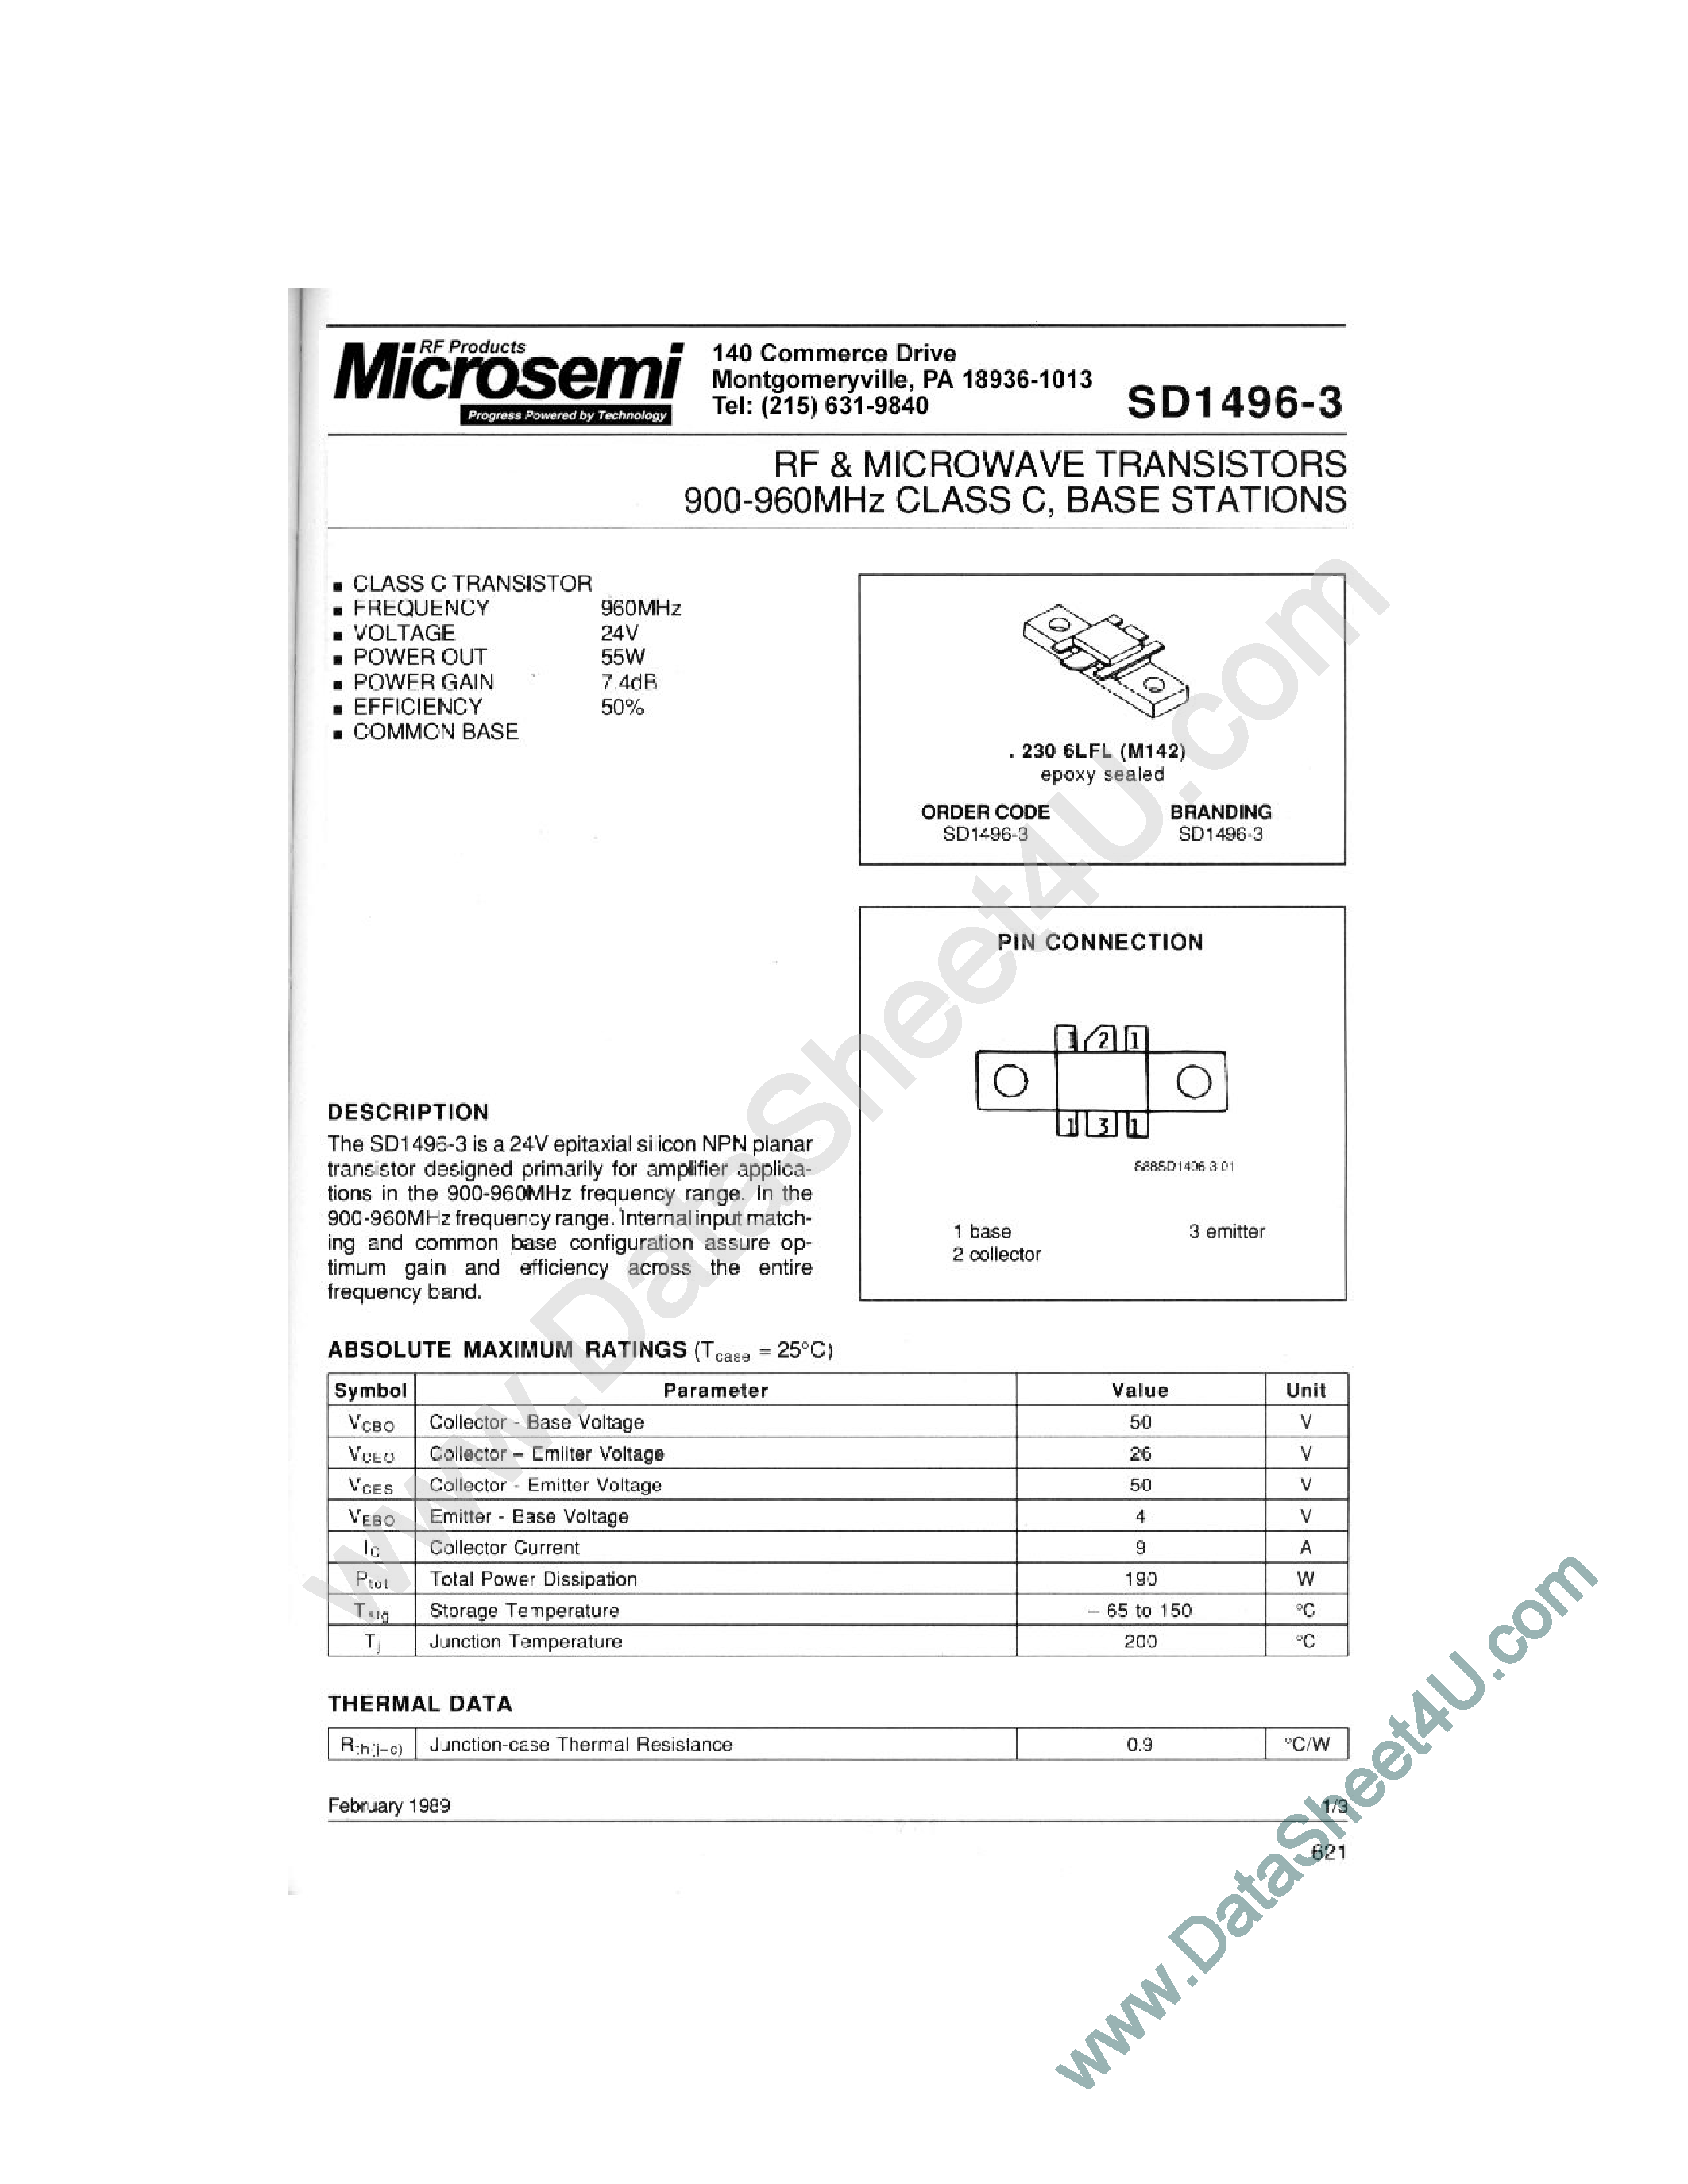 Datasheet SD1496-3 - RF & MICROWAVE TRANSISTORS 900-960 MHz CLASS C BASE STATIONS page 1